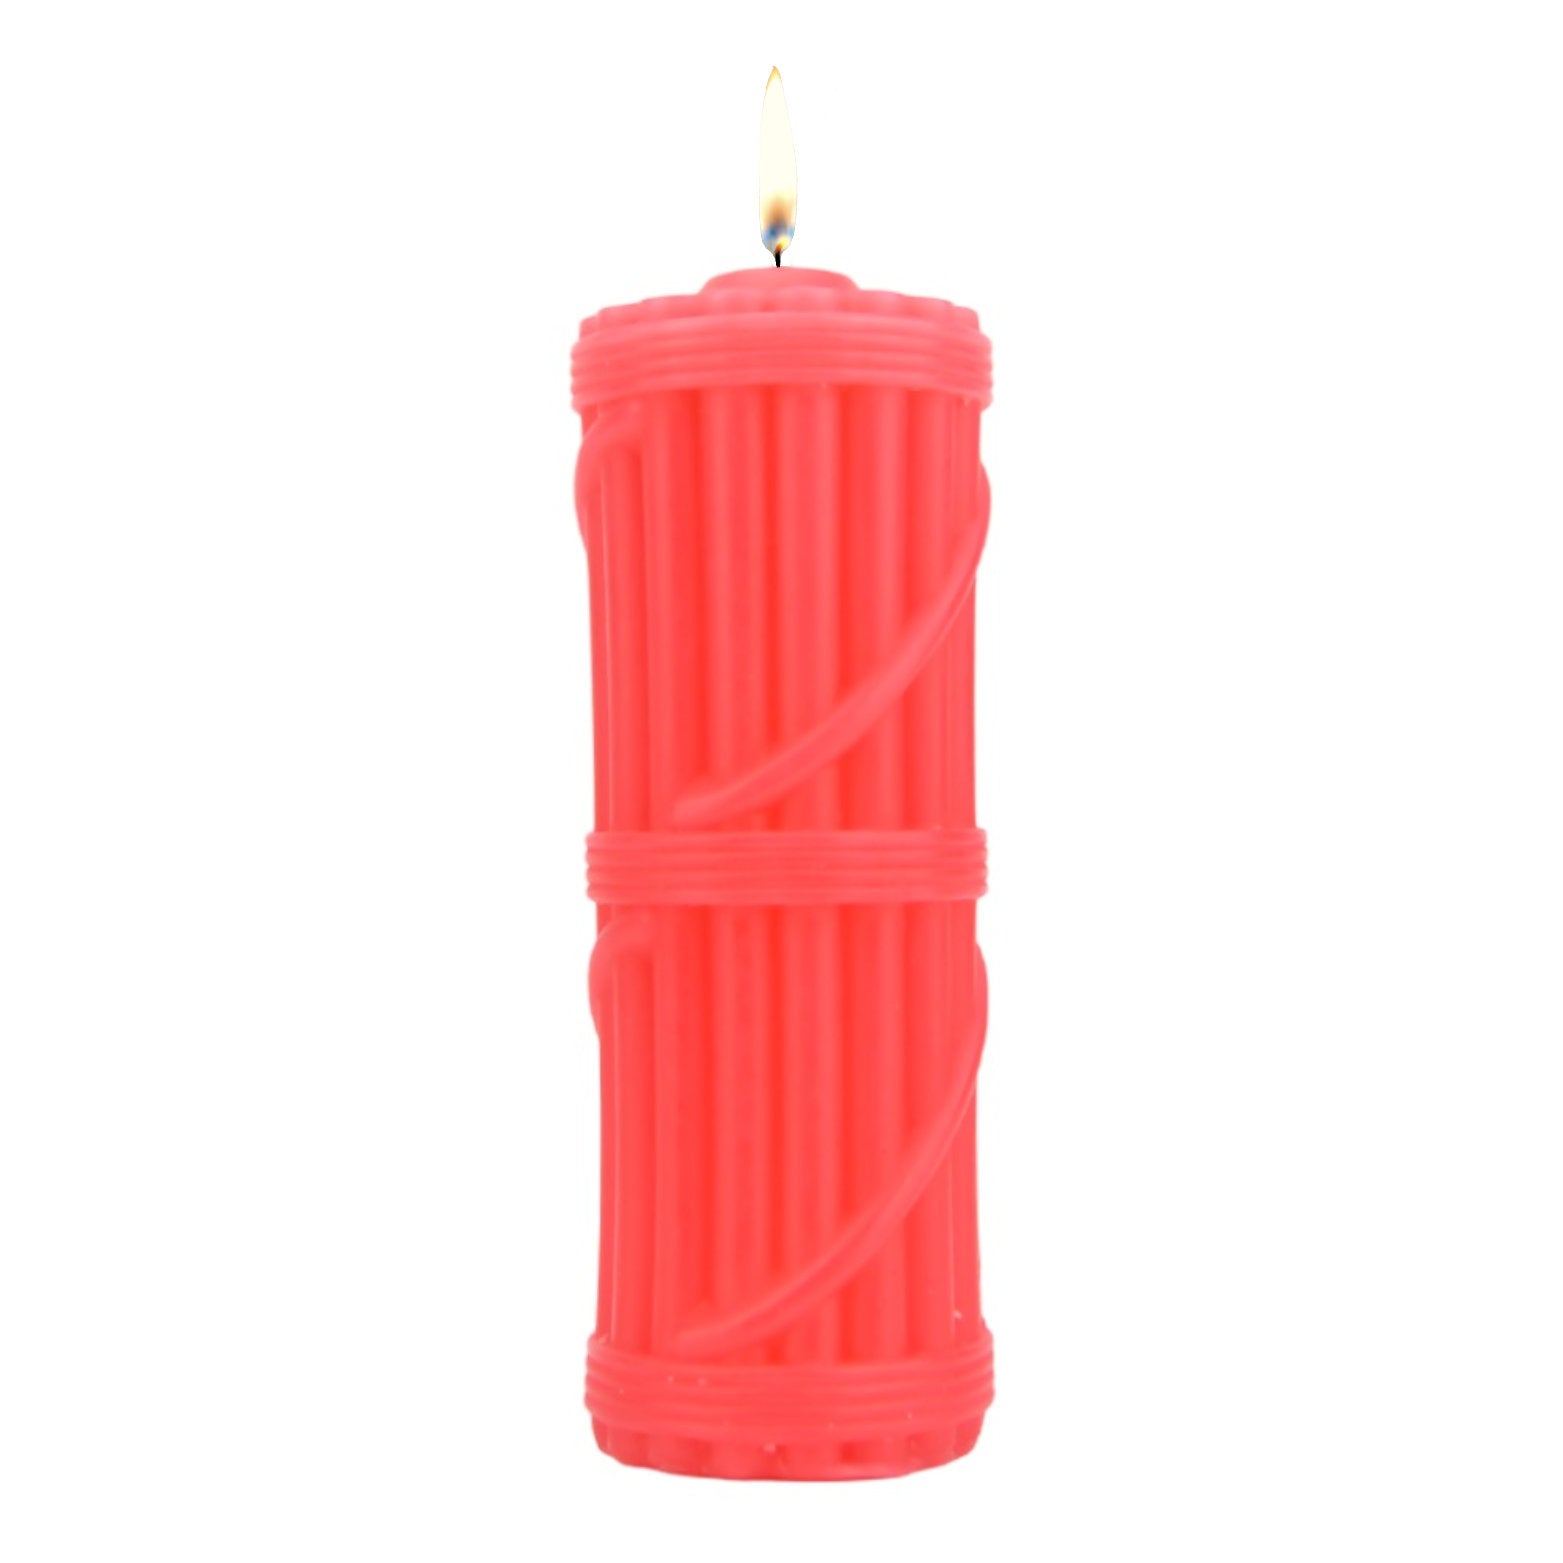 Vibrators, Sex Toy Kits and Sex Toys at Cloud9Adults - Bound to Play. Hot Wax Candle Red - Buy Sex Toys Online